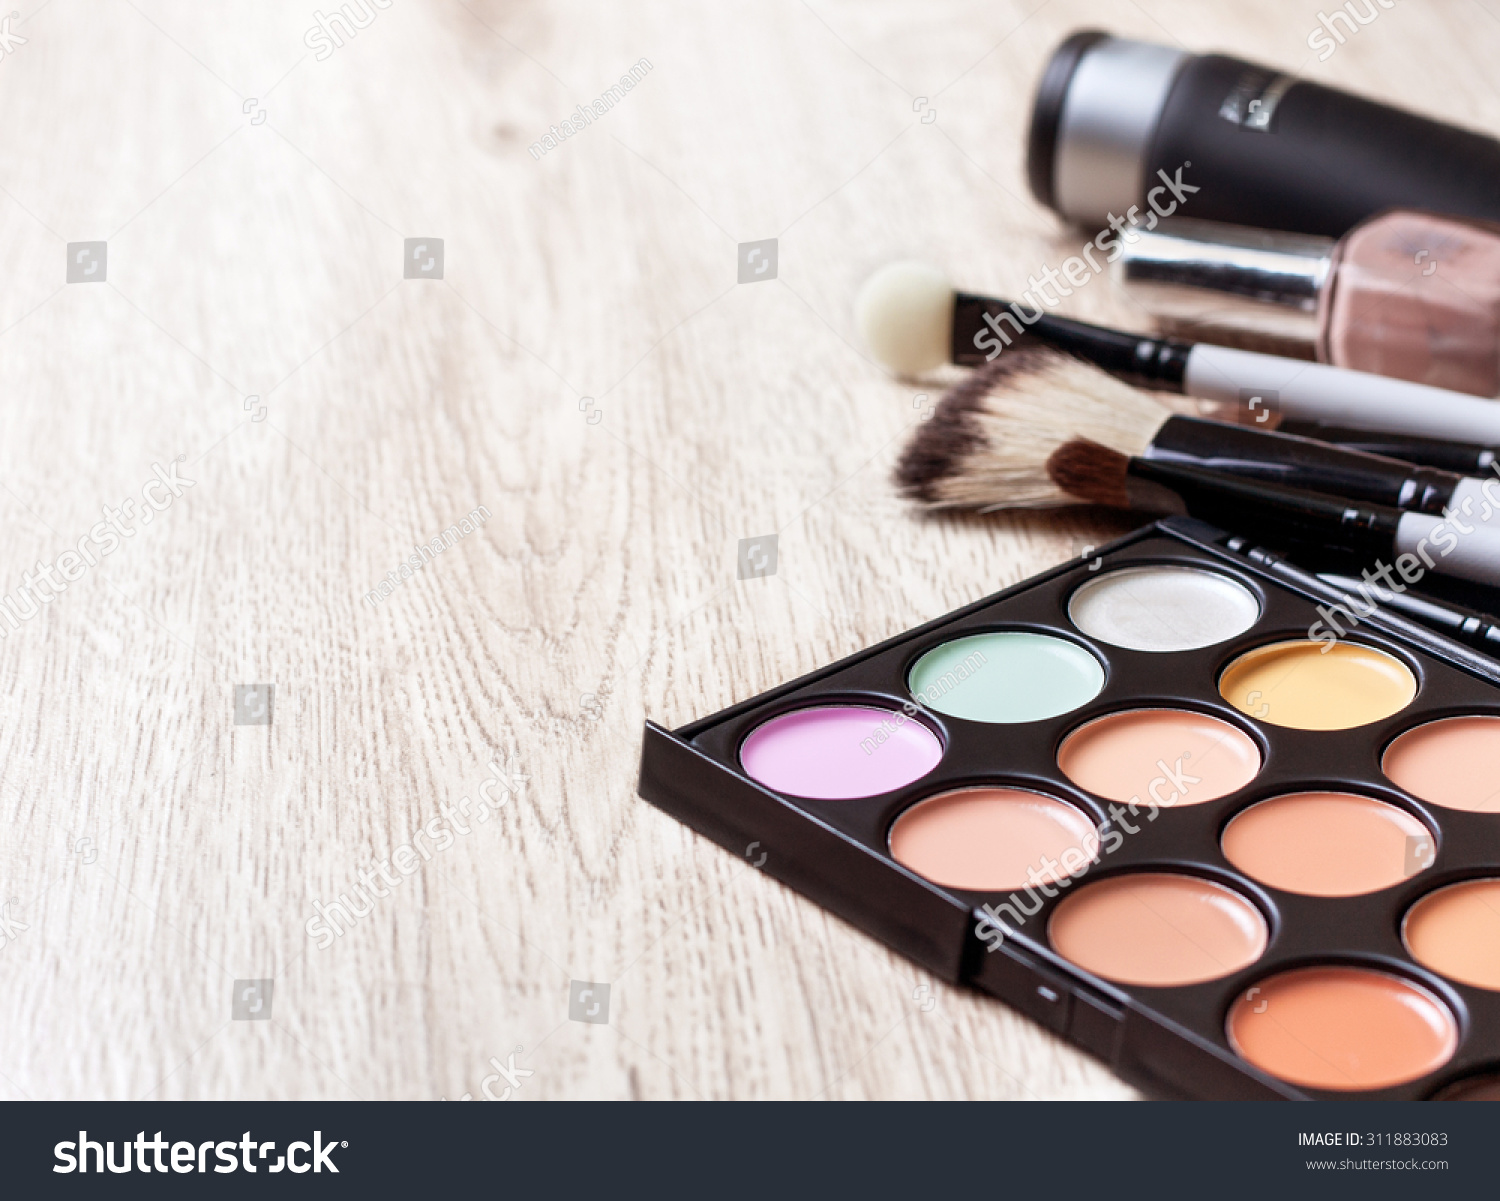 Professional makeup palette, makeup brushes, makeup products  with copyspace #311883083